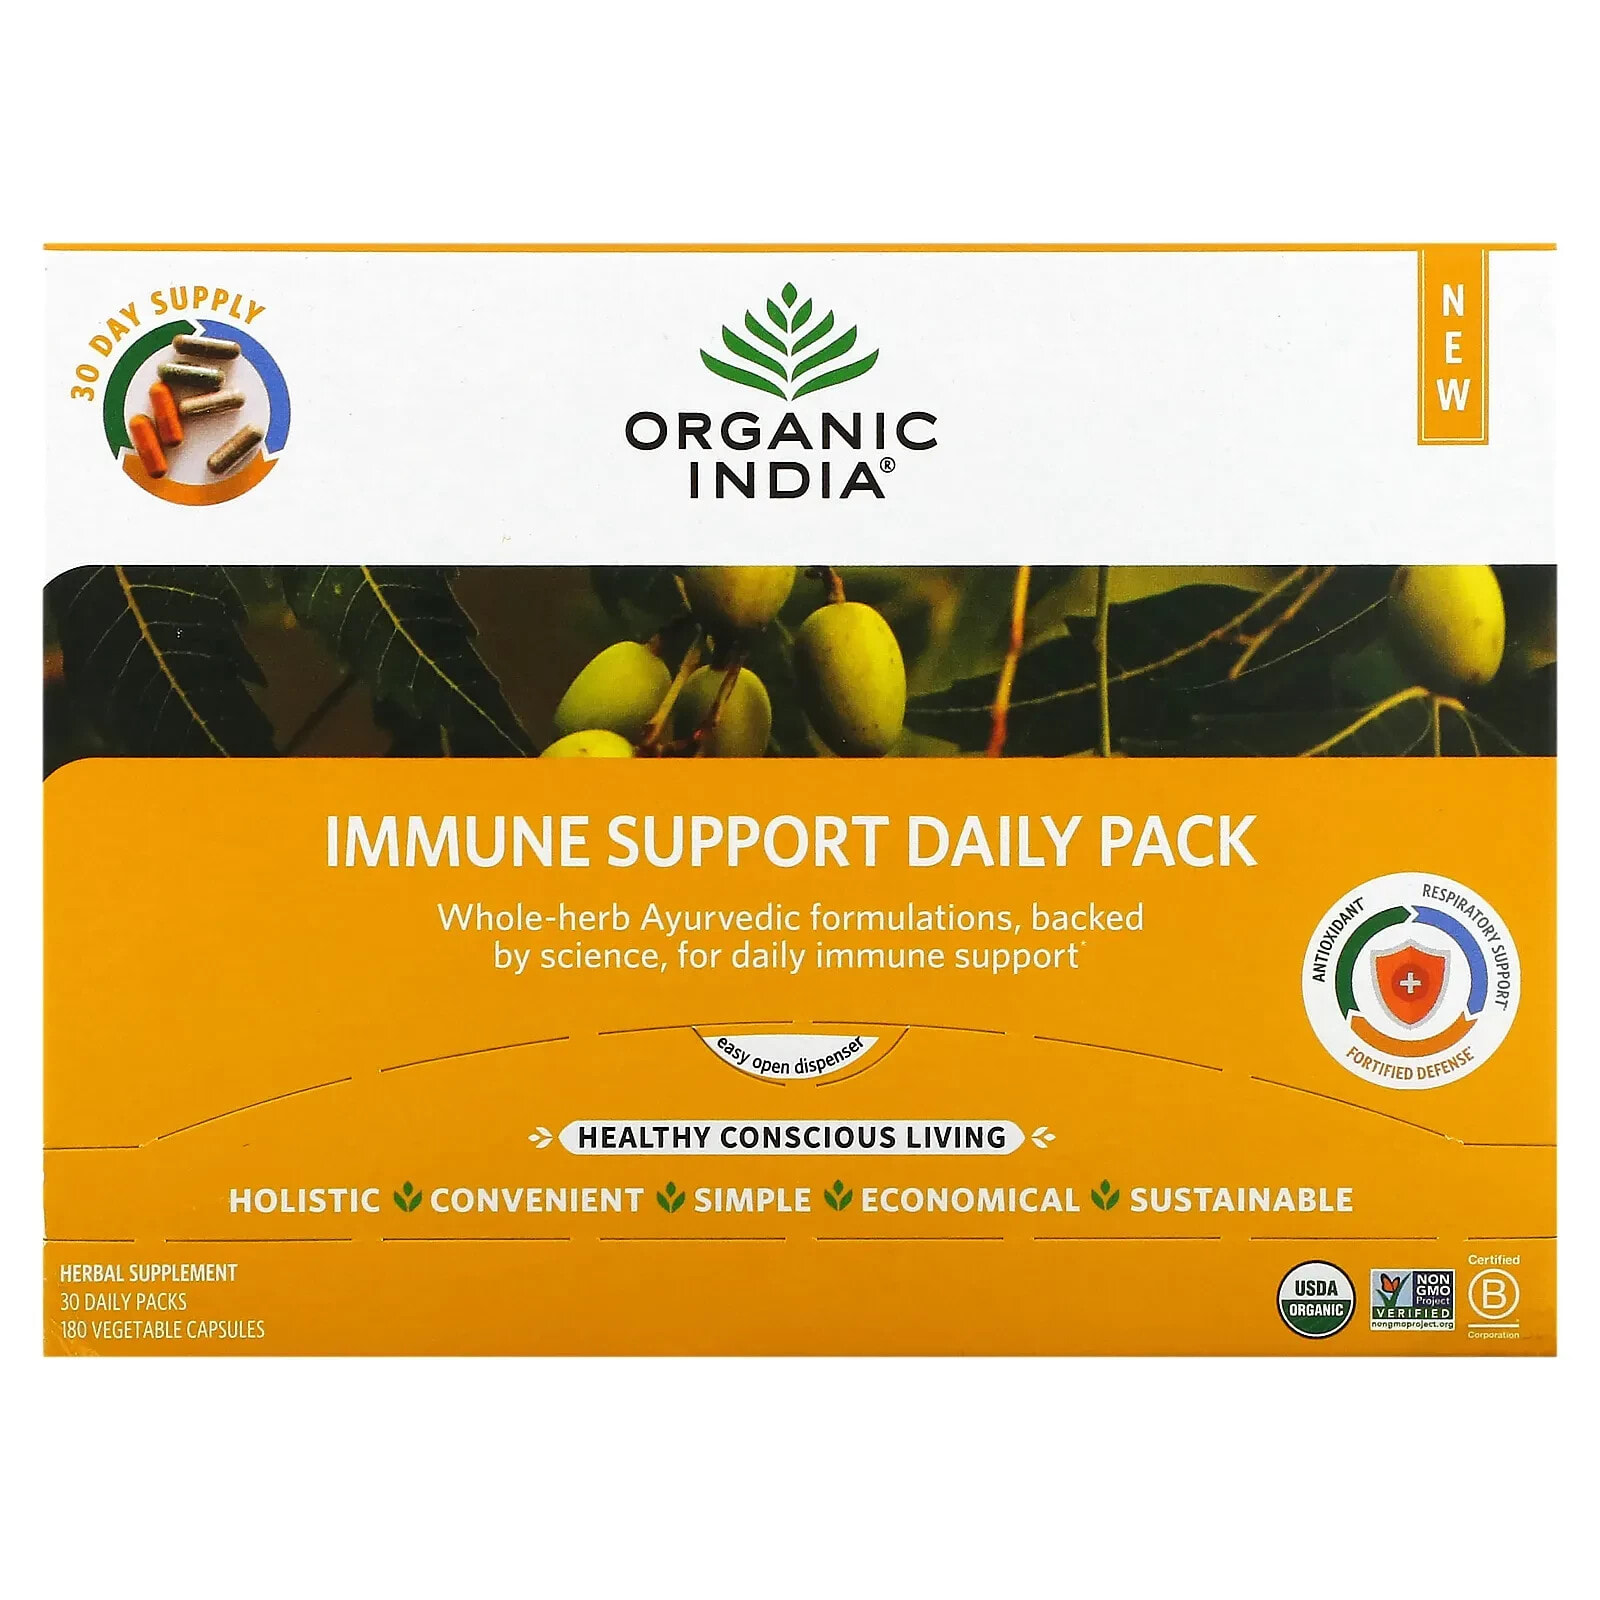 Immune Support Daily Pack, 30 Daily Packs, 180 Vegetable Capsules